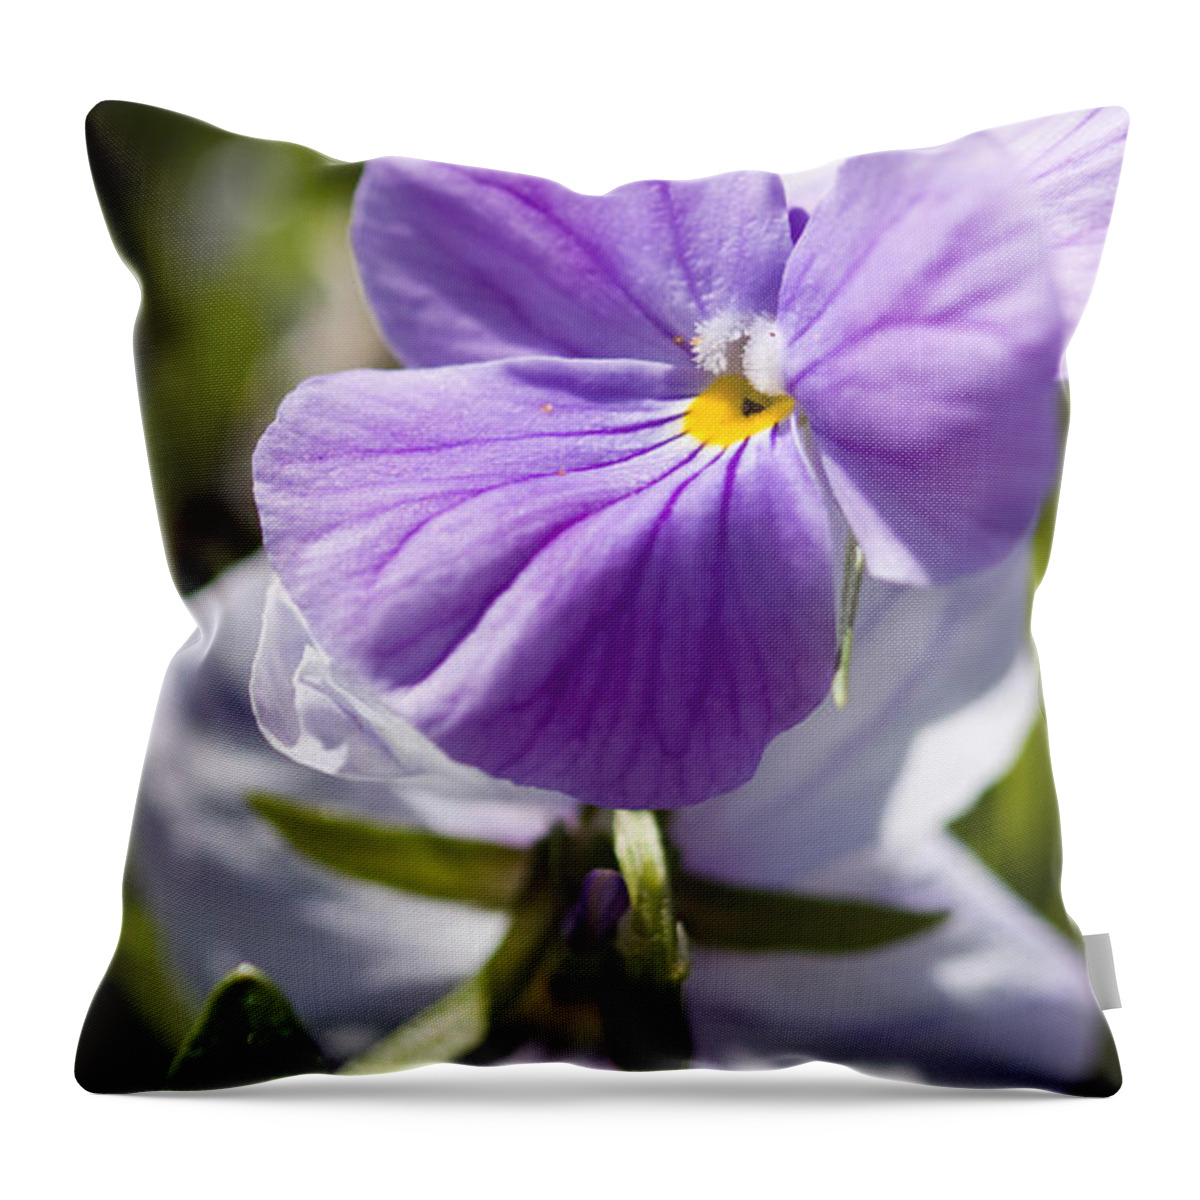 Rose Photographs Throw Pillow featuring the photograph Woodward Pansy by Vernis Maxwell